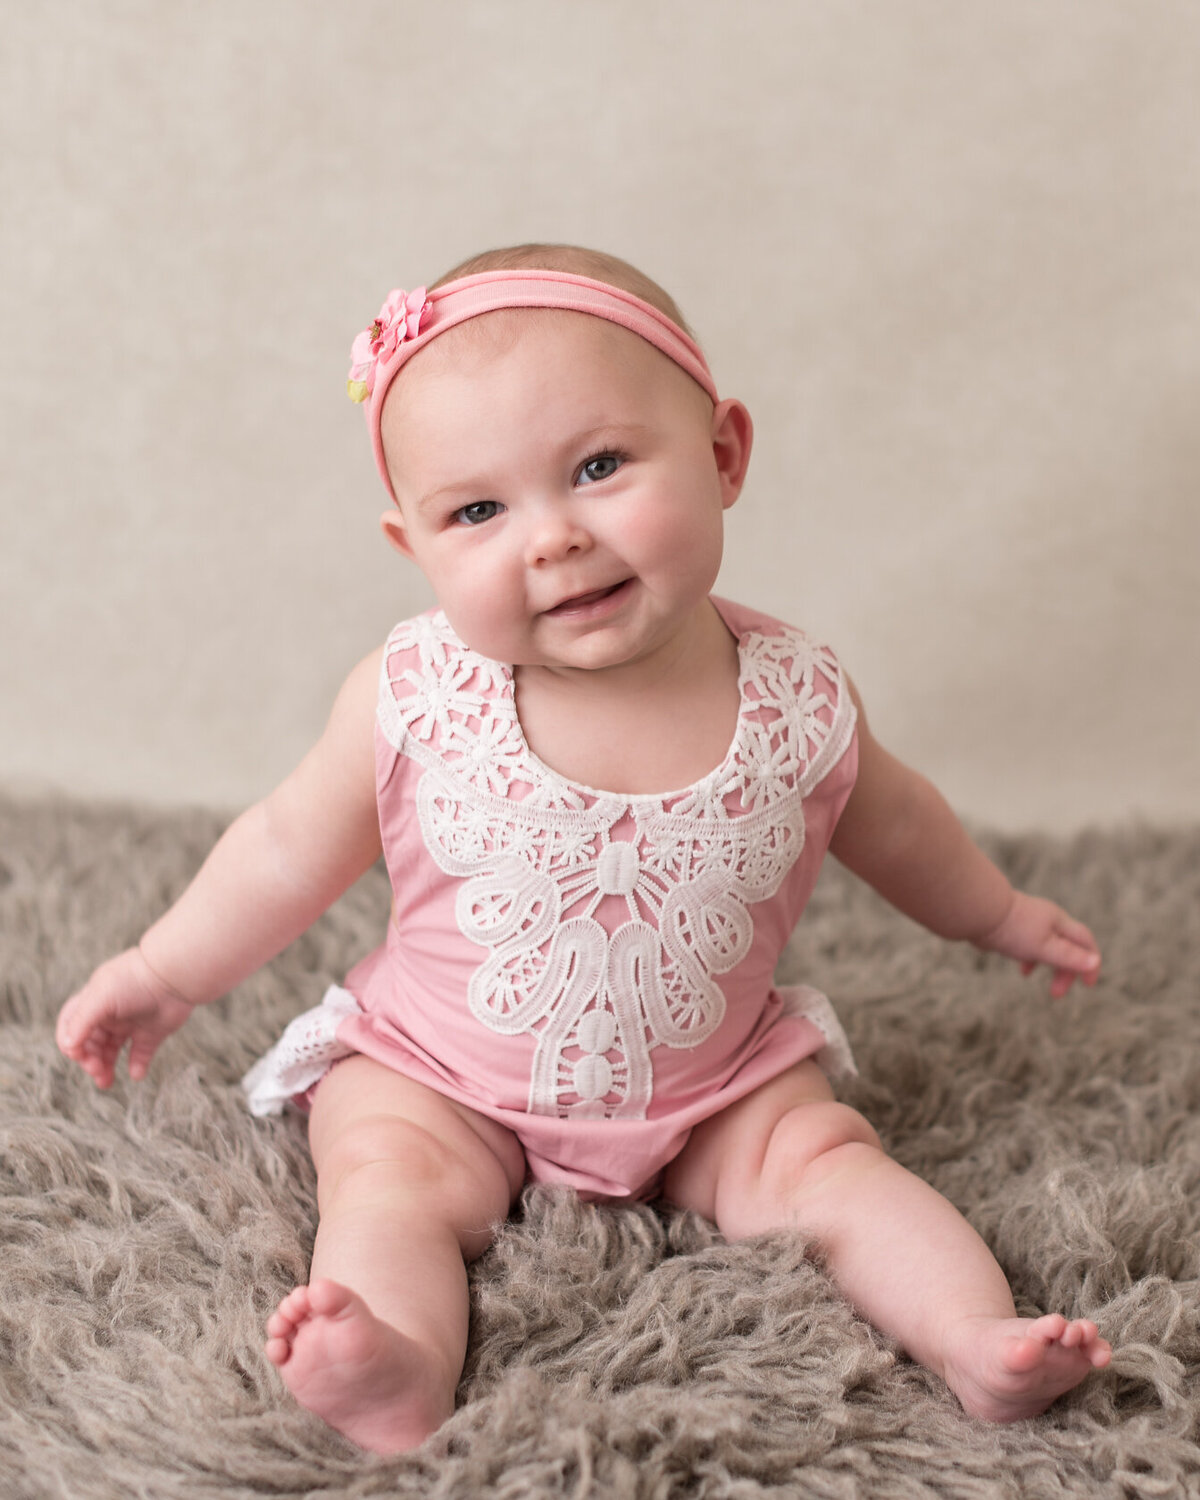 adorable baby in pink dress and brown furry background